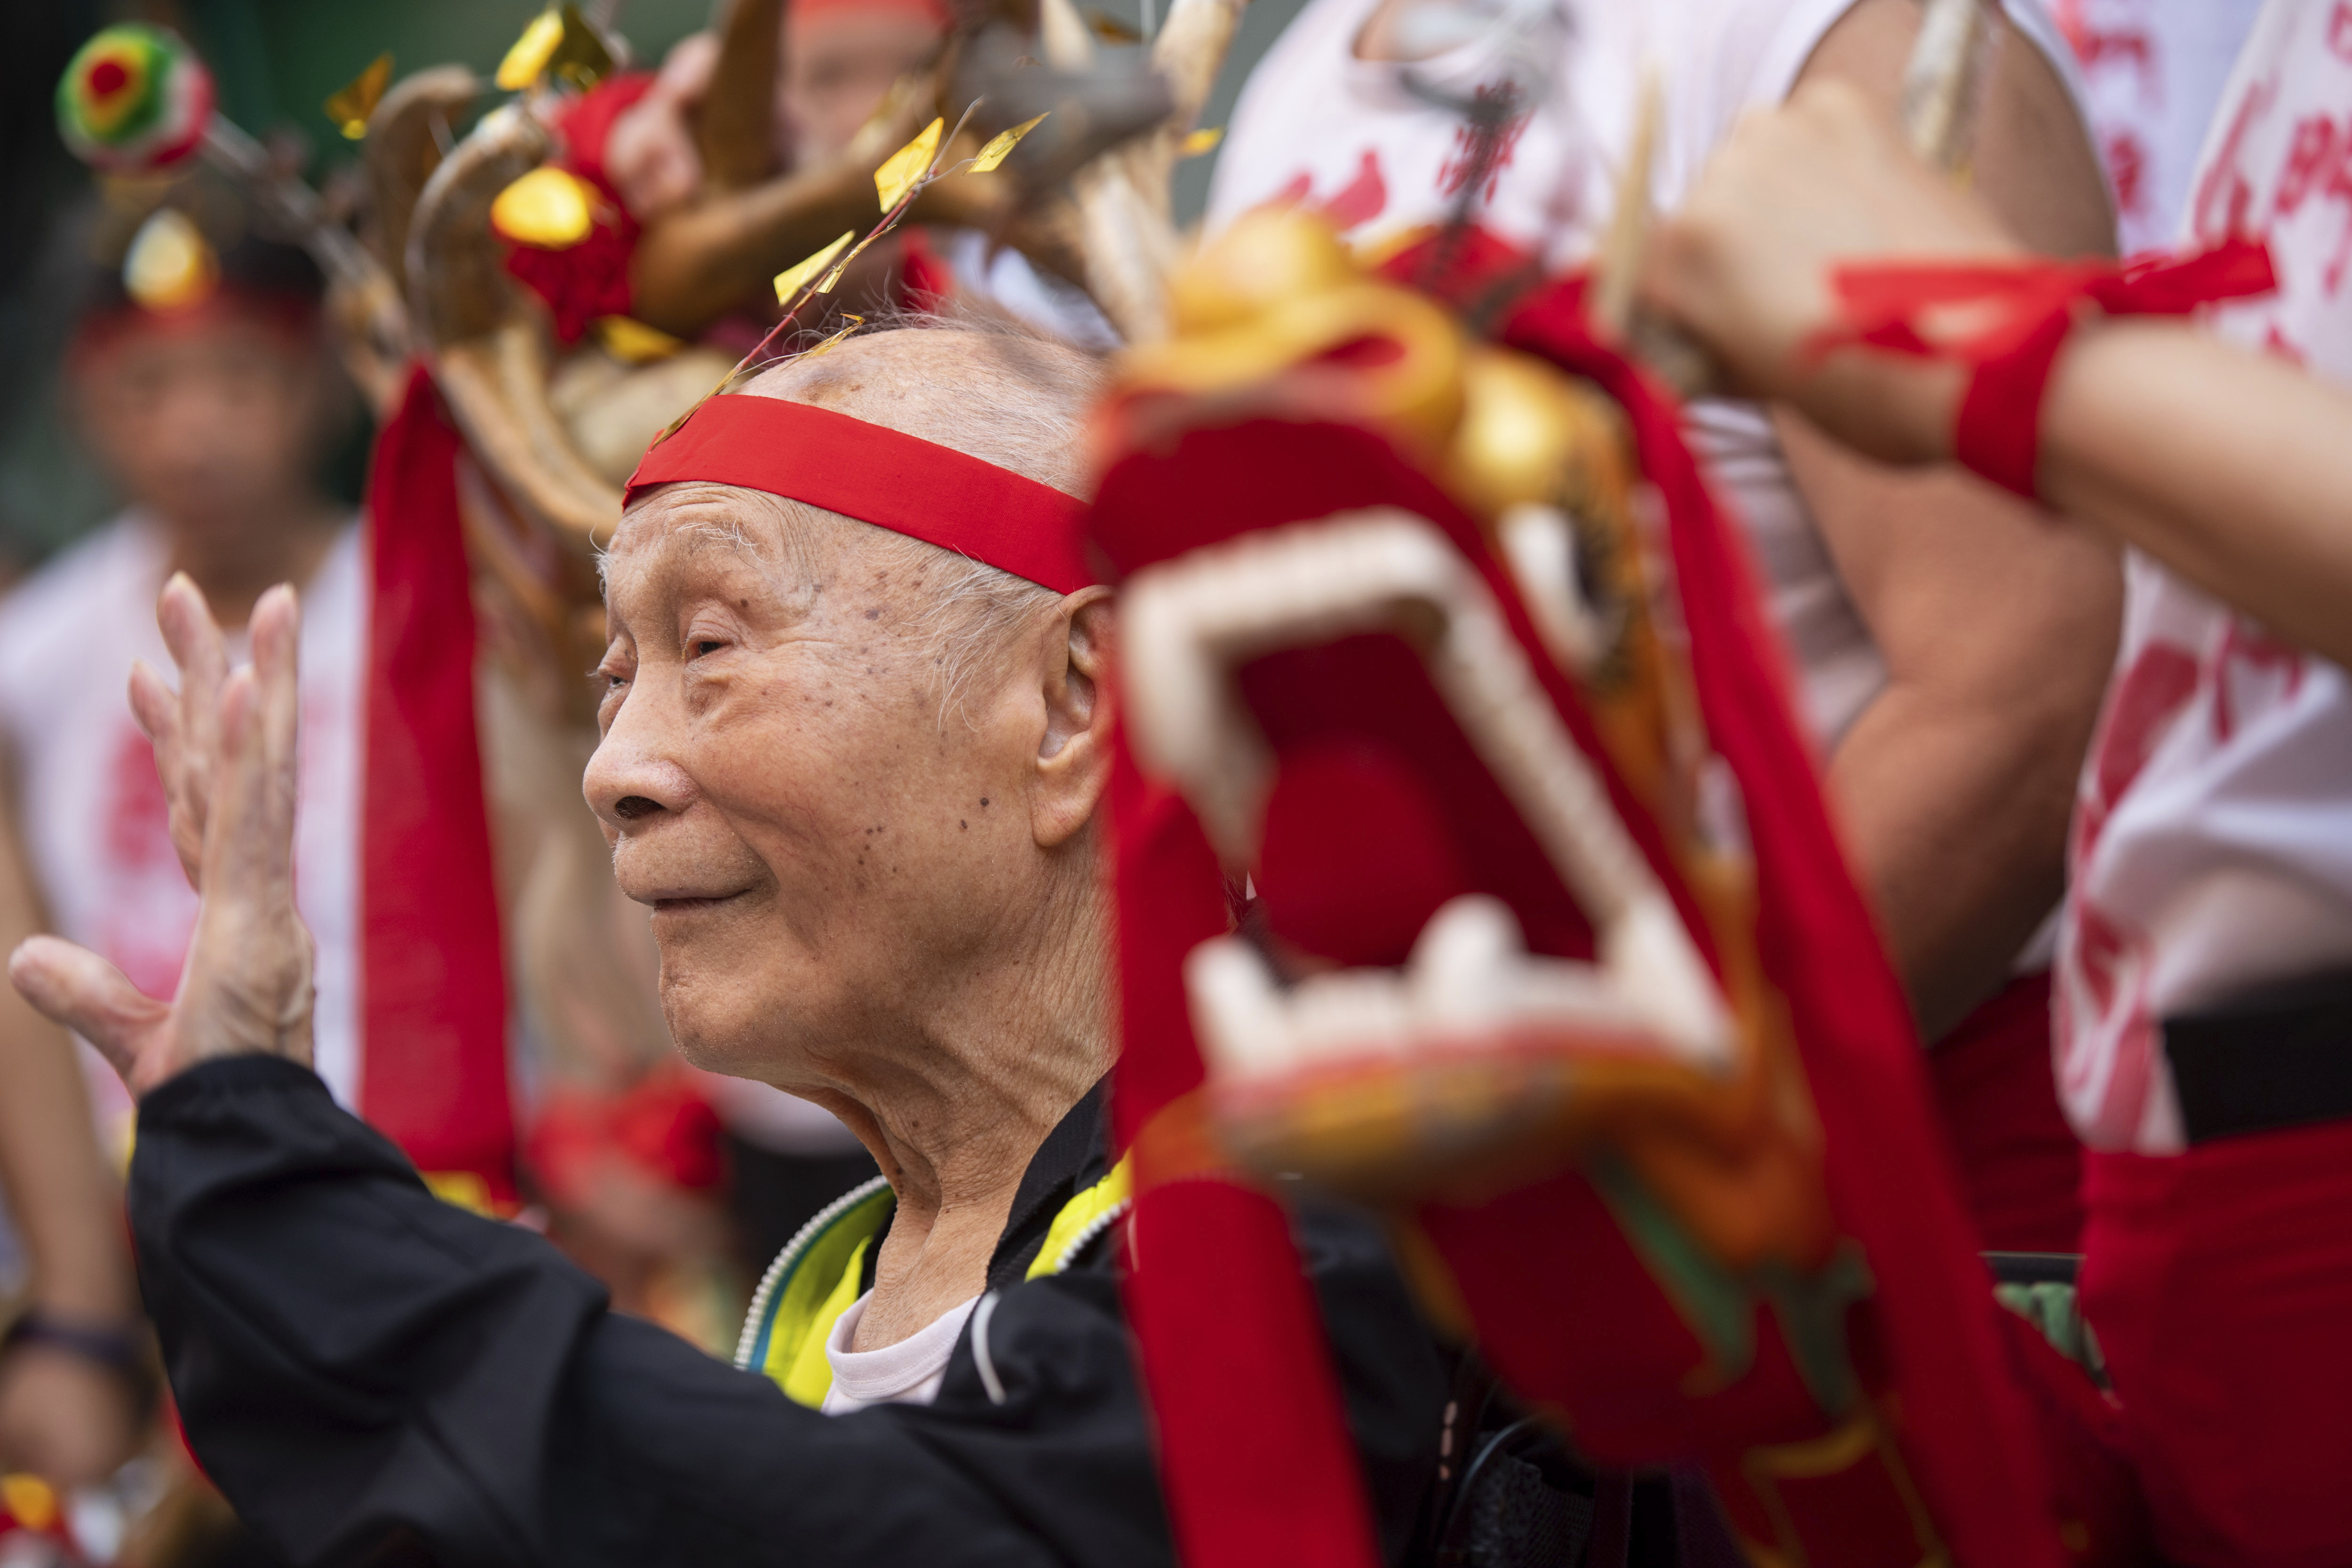 People perform drunk dragon dance during the Drunken Dragon Festival to celebrate the Buddha's birthday in Macau, China, 12 May 2019. Recognized as an item of China's national intangible cultural heritage, the Drunken Dragon Festival originates from a Macao legend of a Buddhist monk and a divine dragon who saved people from the plague during the Qing Dynasty.  (Imaginechina via AP Images)